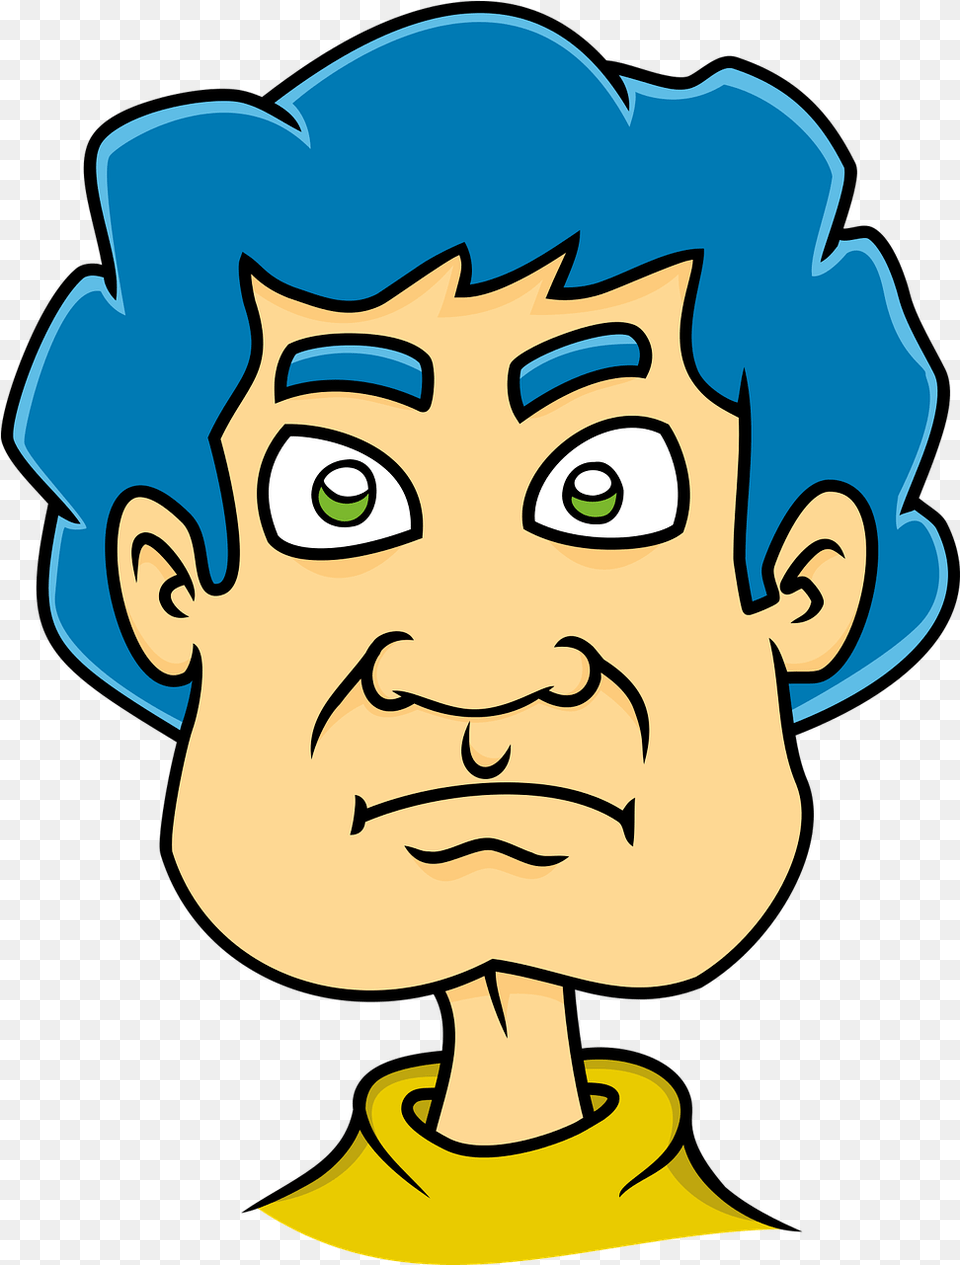 Angry Man Blue Hair Caricature Free Vector Graphic On Pixabay Angry Girl Dface Cartoon, Baby, Person, Face, Head Png Image